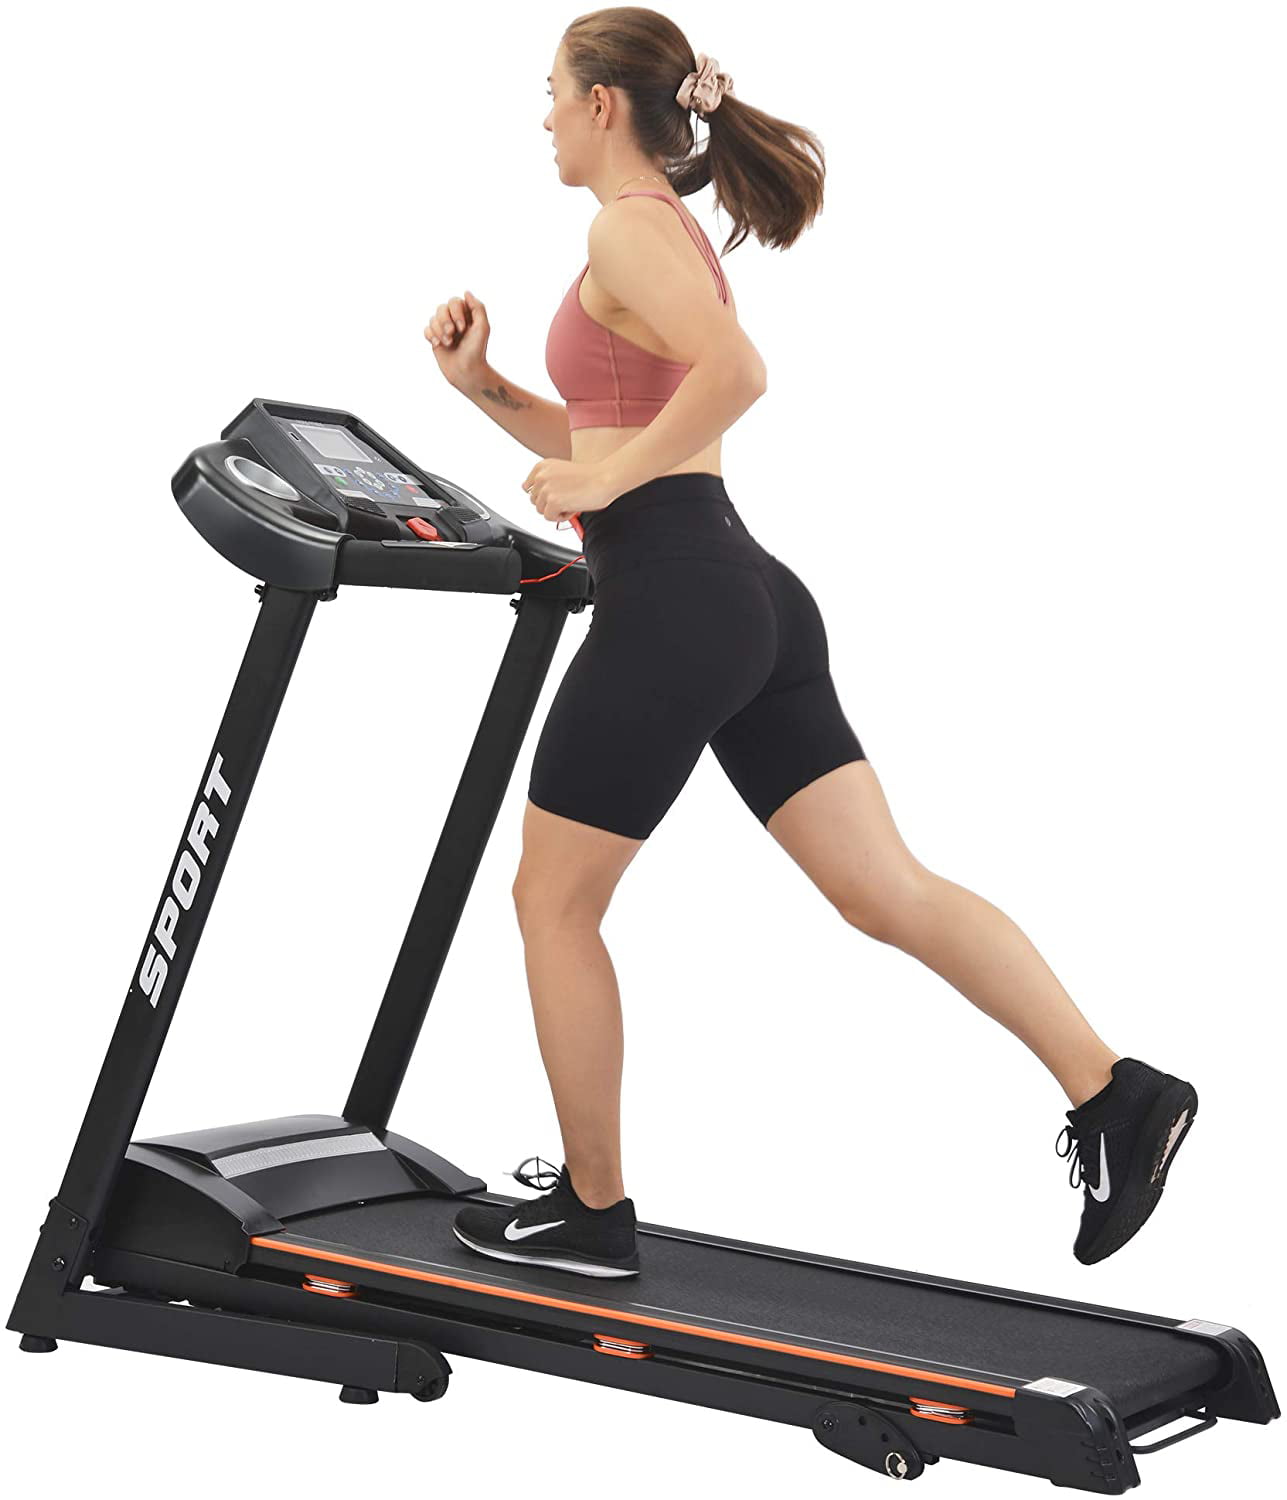 Details about   3.0HP Folding Gym Treadmill Indoor Electric Running Machine W/ 12 Pre-Programs 